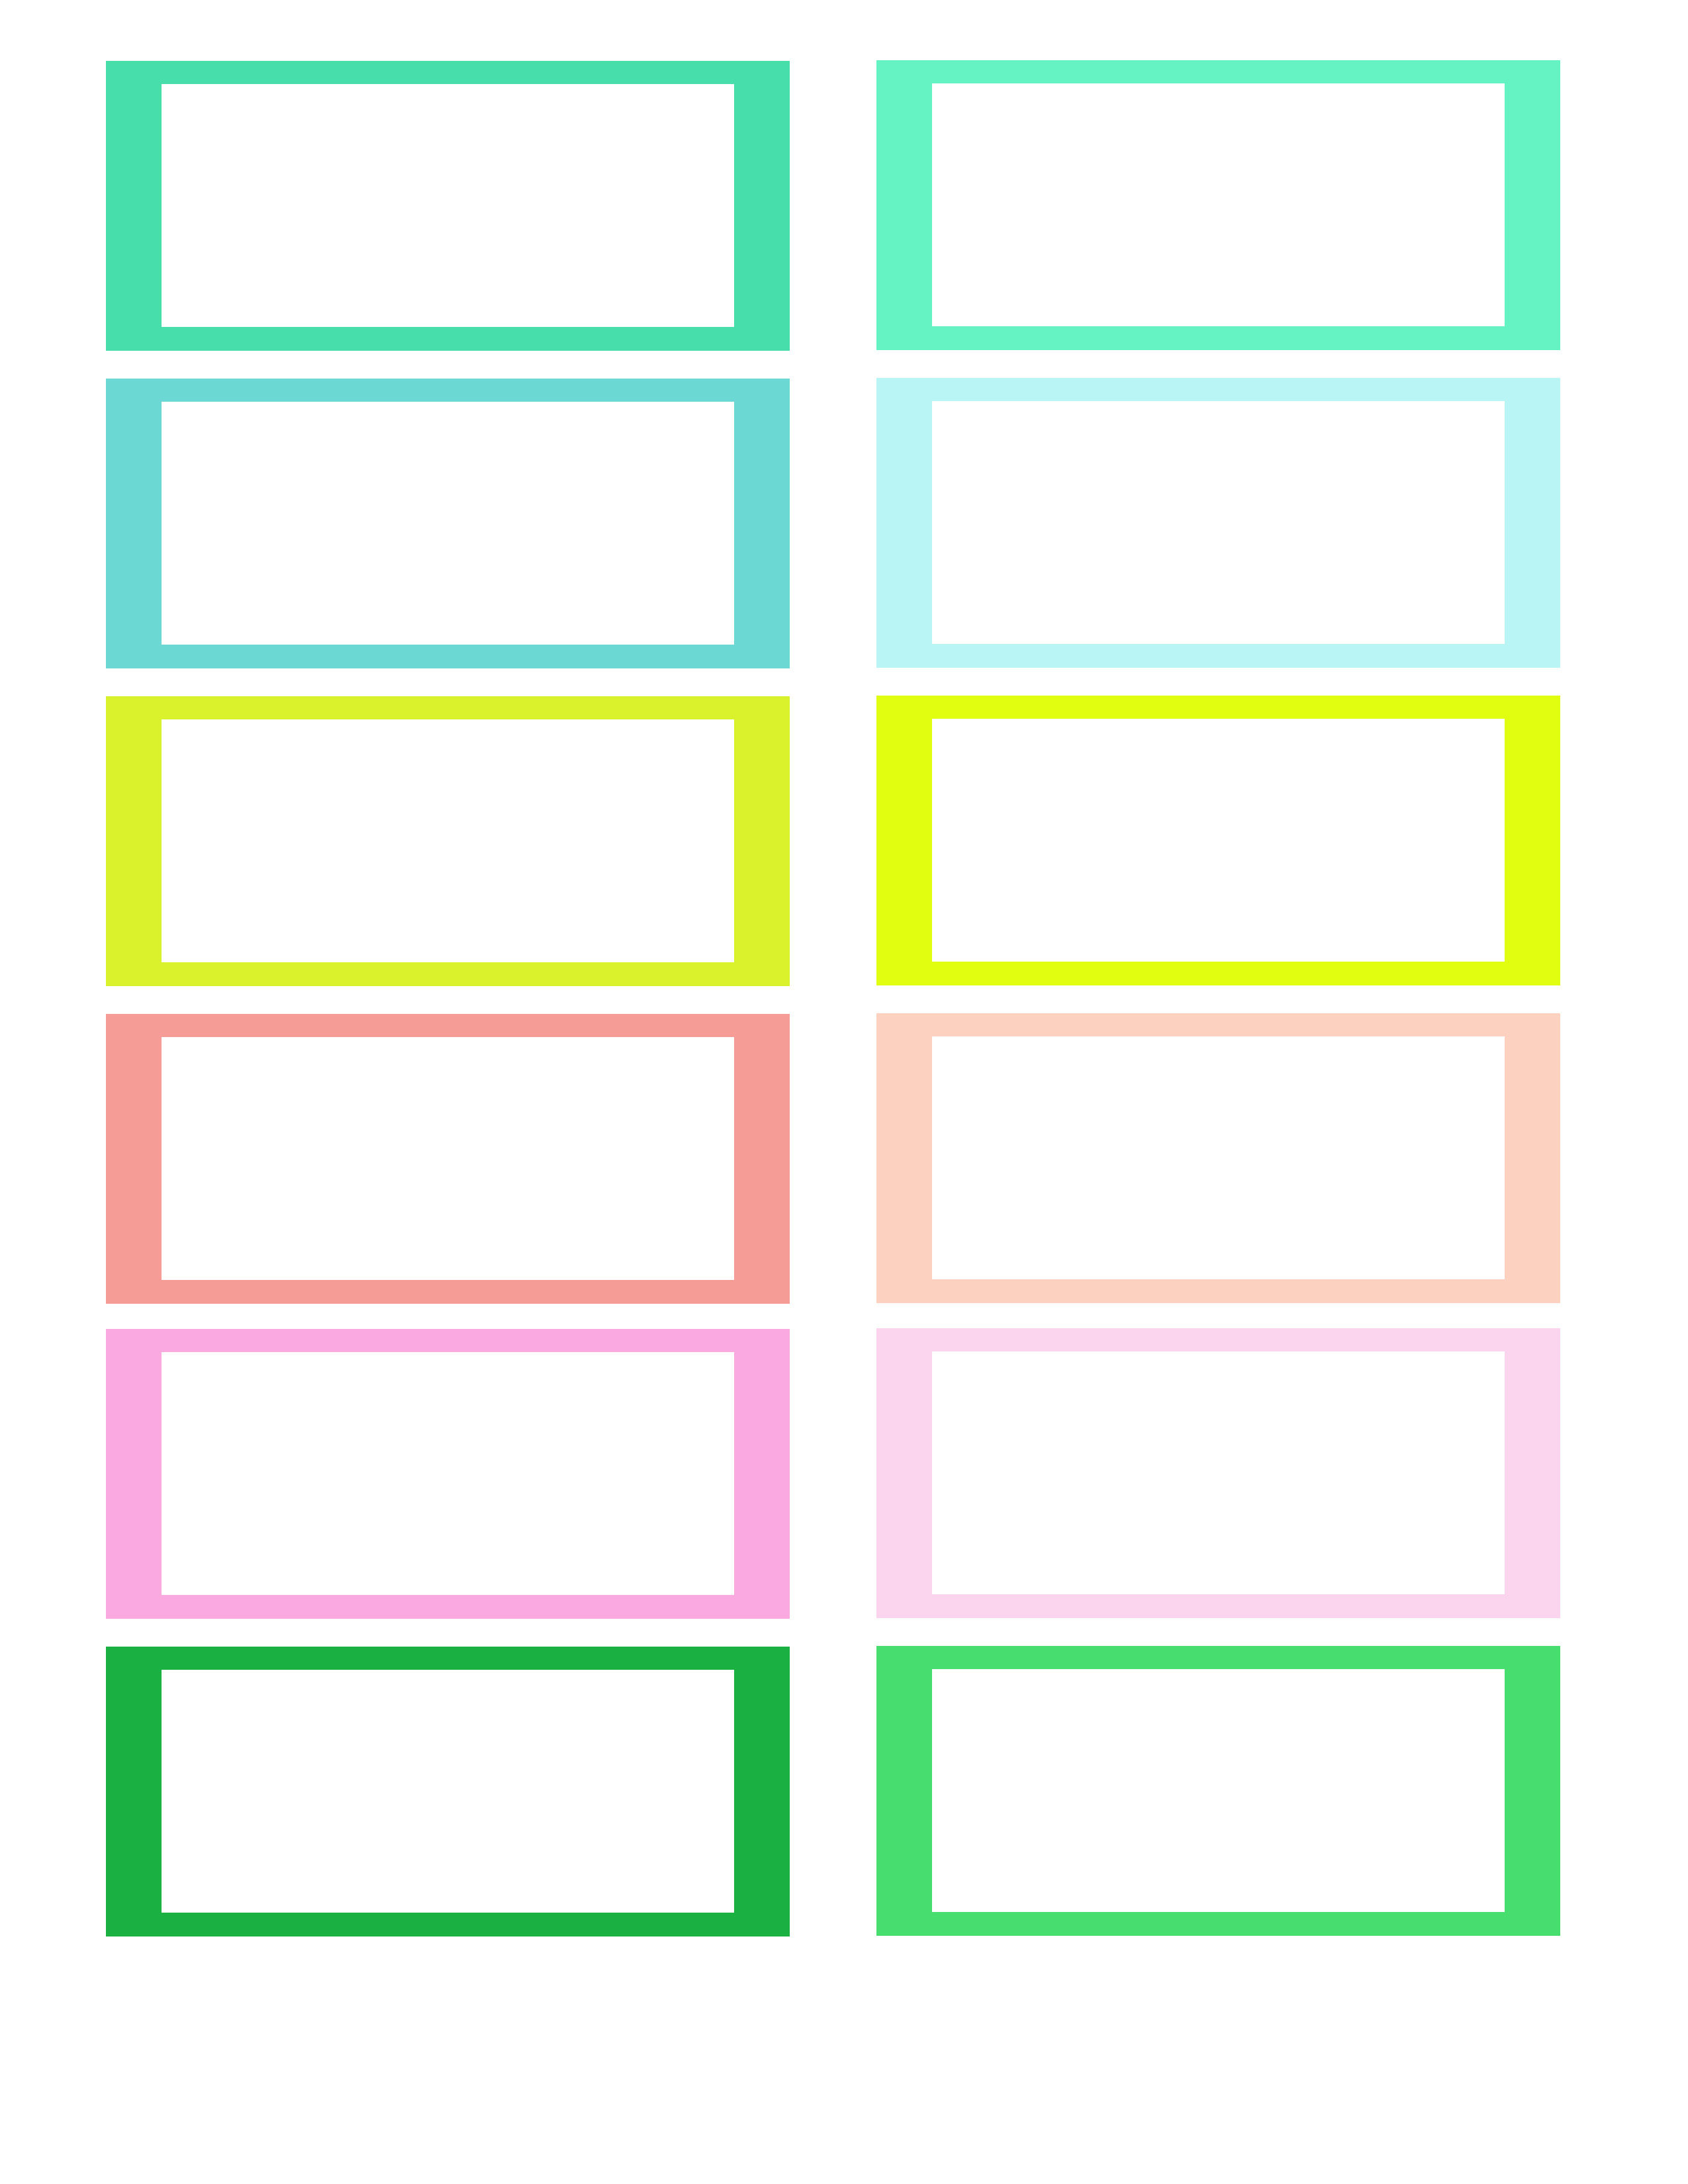 5-best-images-of-free-printable-label-borders-doodle-border-free